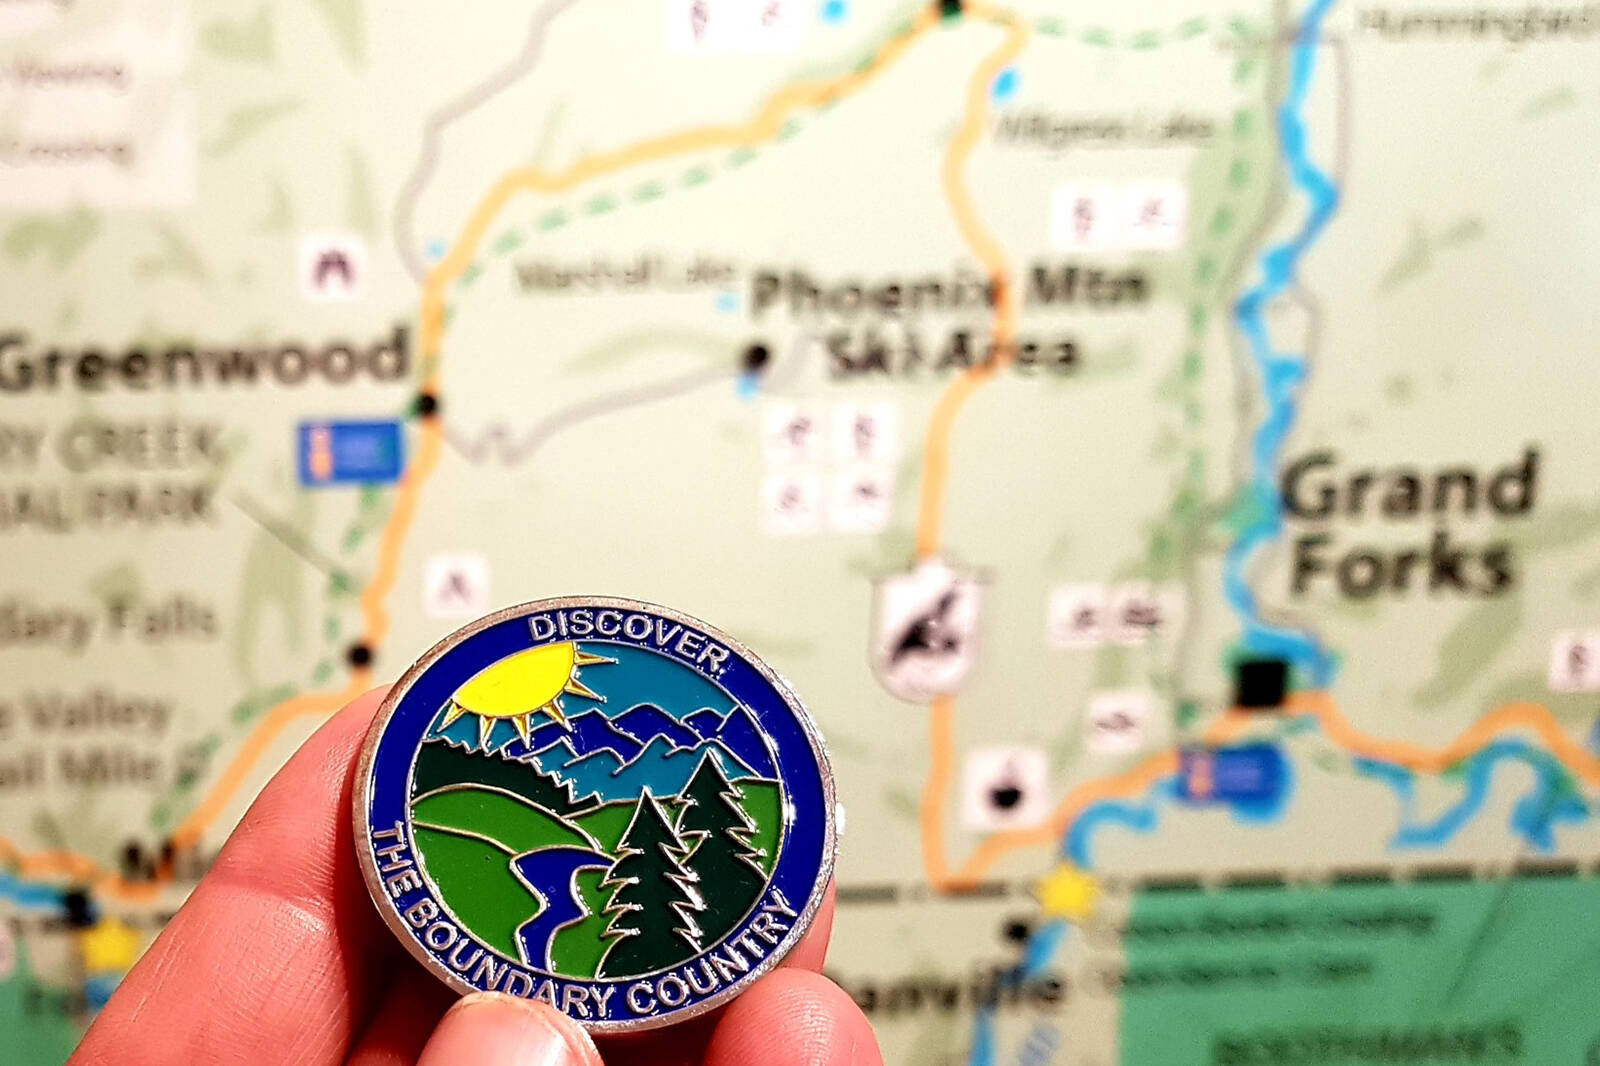 This year will mark the 125th anniversary of the City of Grand Forks and to help celebrate, a local Geocaching team will be creating new caches around the city to lead visitors and locals on their own adventure.